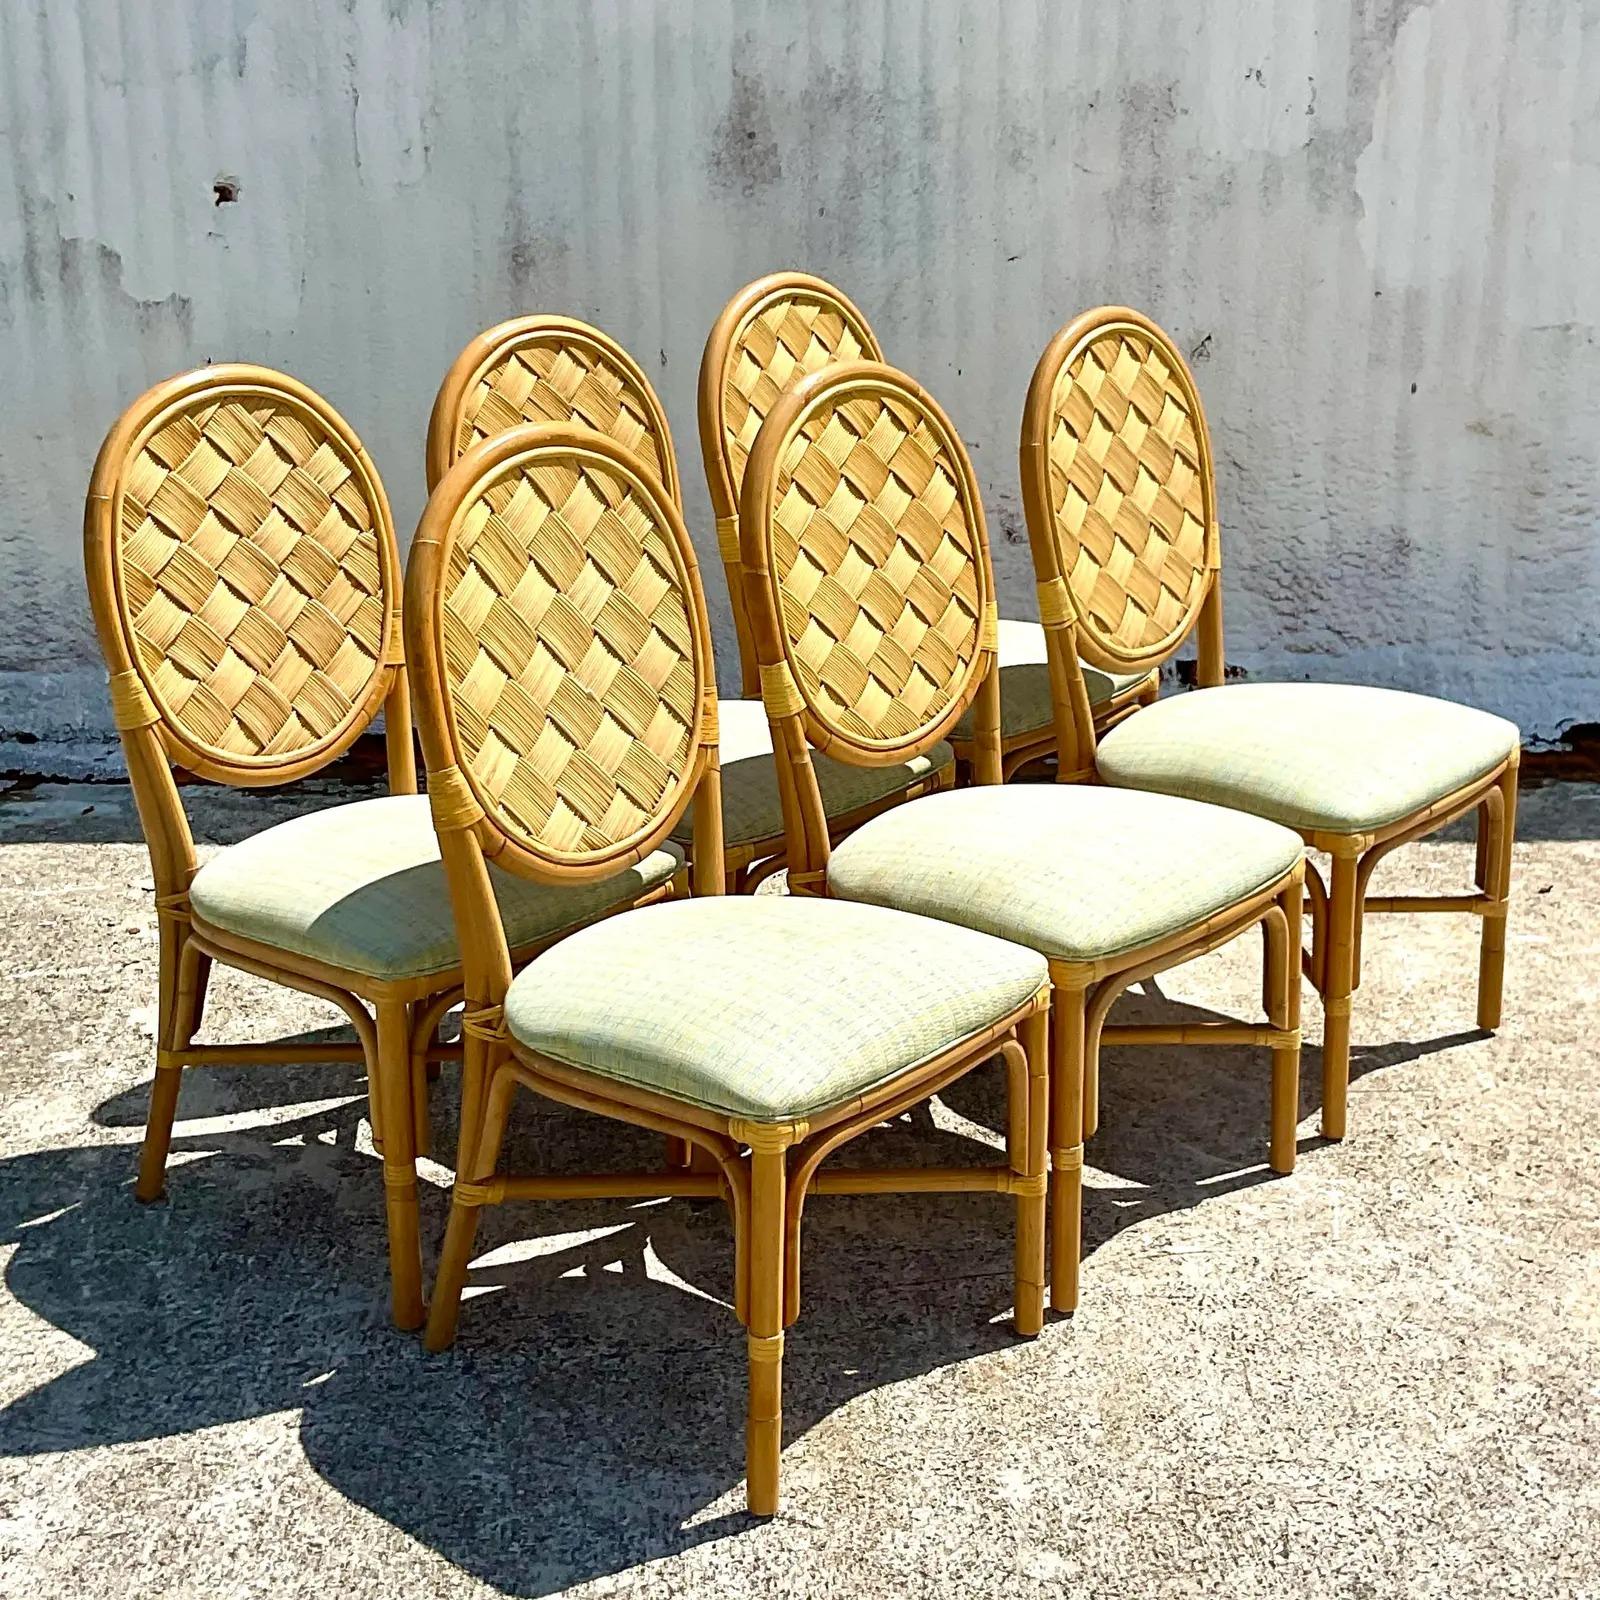 Fantastic set of six vintage Coastal dining chairs. Beautiful medallion back with a chic woven rattan inset panel. Done in the manner of a John Hutton for Donghia. Two sets of six available for a larger set. Acquired from a Palm Beach estate.